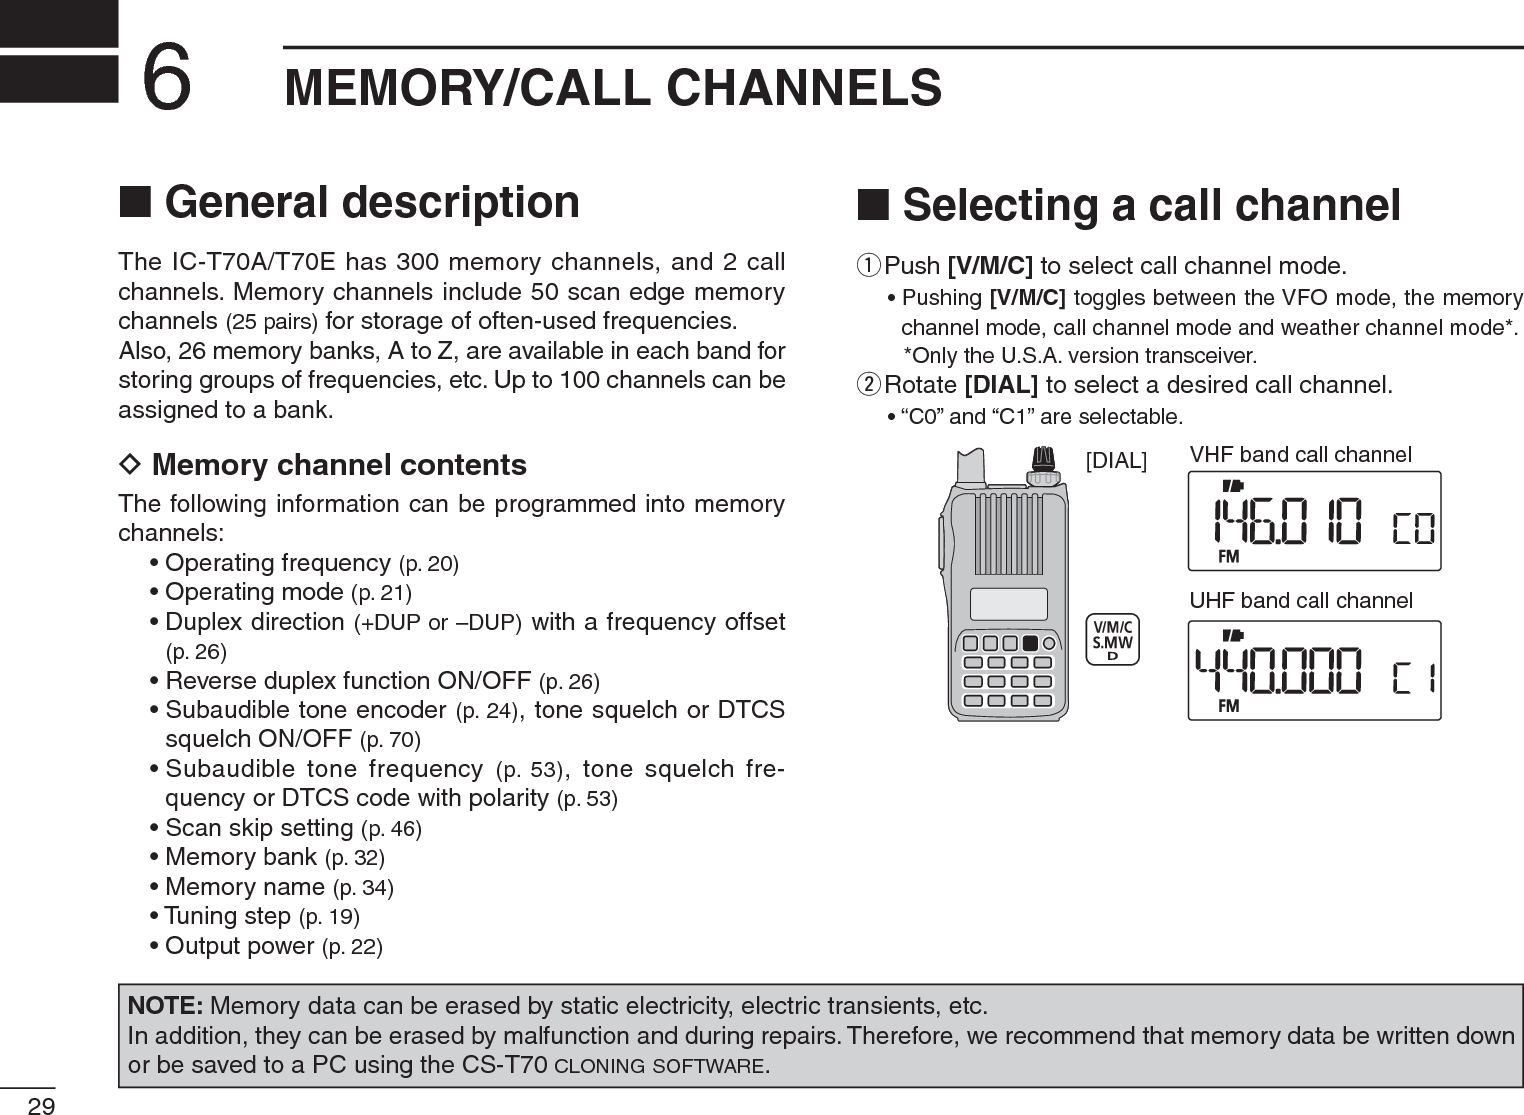 29MEMORY/CALL CHANNELS6N General descriptionThe IC-T70A/T70E has 300 memory channels, and 2 call channels. Memory channels include 50 scan edge memory channels (25 pairs) for storage of often-used frequencies.Also, 26 memory banks, A to Z, are available in each band for storing groups of frequencies, etc. Up to 100 channels can be assigned to a bank.D Memory channel contentsThe following information can be programmed into memory channels:• Operating frequency (p. 20)• Operating mode (p. 21)• Duplex direction (+DUP or –DUP) with a frequency offset (p. 26)• Reverse duplex function ON/OFF (p. 26)• Subaudible tone encoder (p. 24), tone squelch or DTCS squelch ON/OFF (p. 70)• Subaudible tone frequency (p. 53), tone squelch fre-quency or DTCS code with polarity (p. 53)• Scan skip setting (p. 46)• Memory bank (p. 32)• Memory name (p. 34)• Tuning step (p. 19)• Output power (p. 22)NOTE: Memory data can be erased by static electricity, electric transients, etc.In addition, they can be erased by malfunction and during repairs. Therefore, we recommend that memory data be written down or be saved to a PC using the CS-T70 CLONING SOFTWARE.N Selecting a call channelq  Push [V/M/C] to select call channel mode.• Pushing [V/M/C] toggles between the VFO mode, the memory channel mode, call channel mode and weather channel mode*.*Only the U.S.A. version transceiver.w  Rotate [DIAL] to select a desired call channel.• “C0” and “C1” are selectable.[DIAL] VHF band call channelUHF band call channel